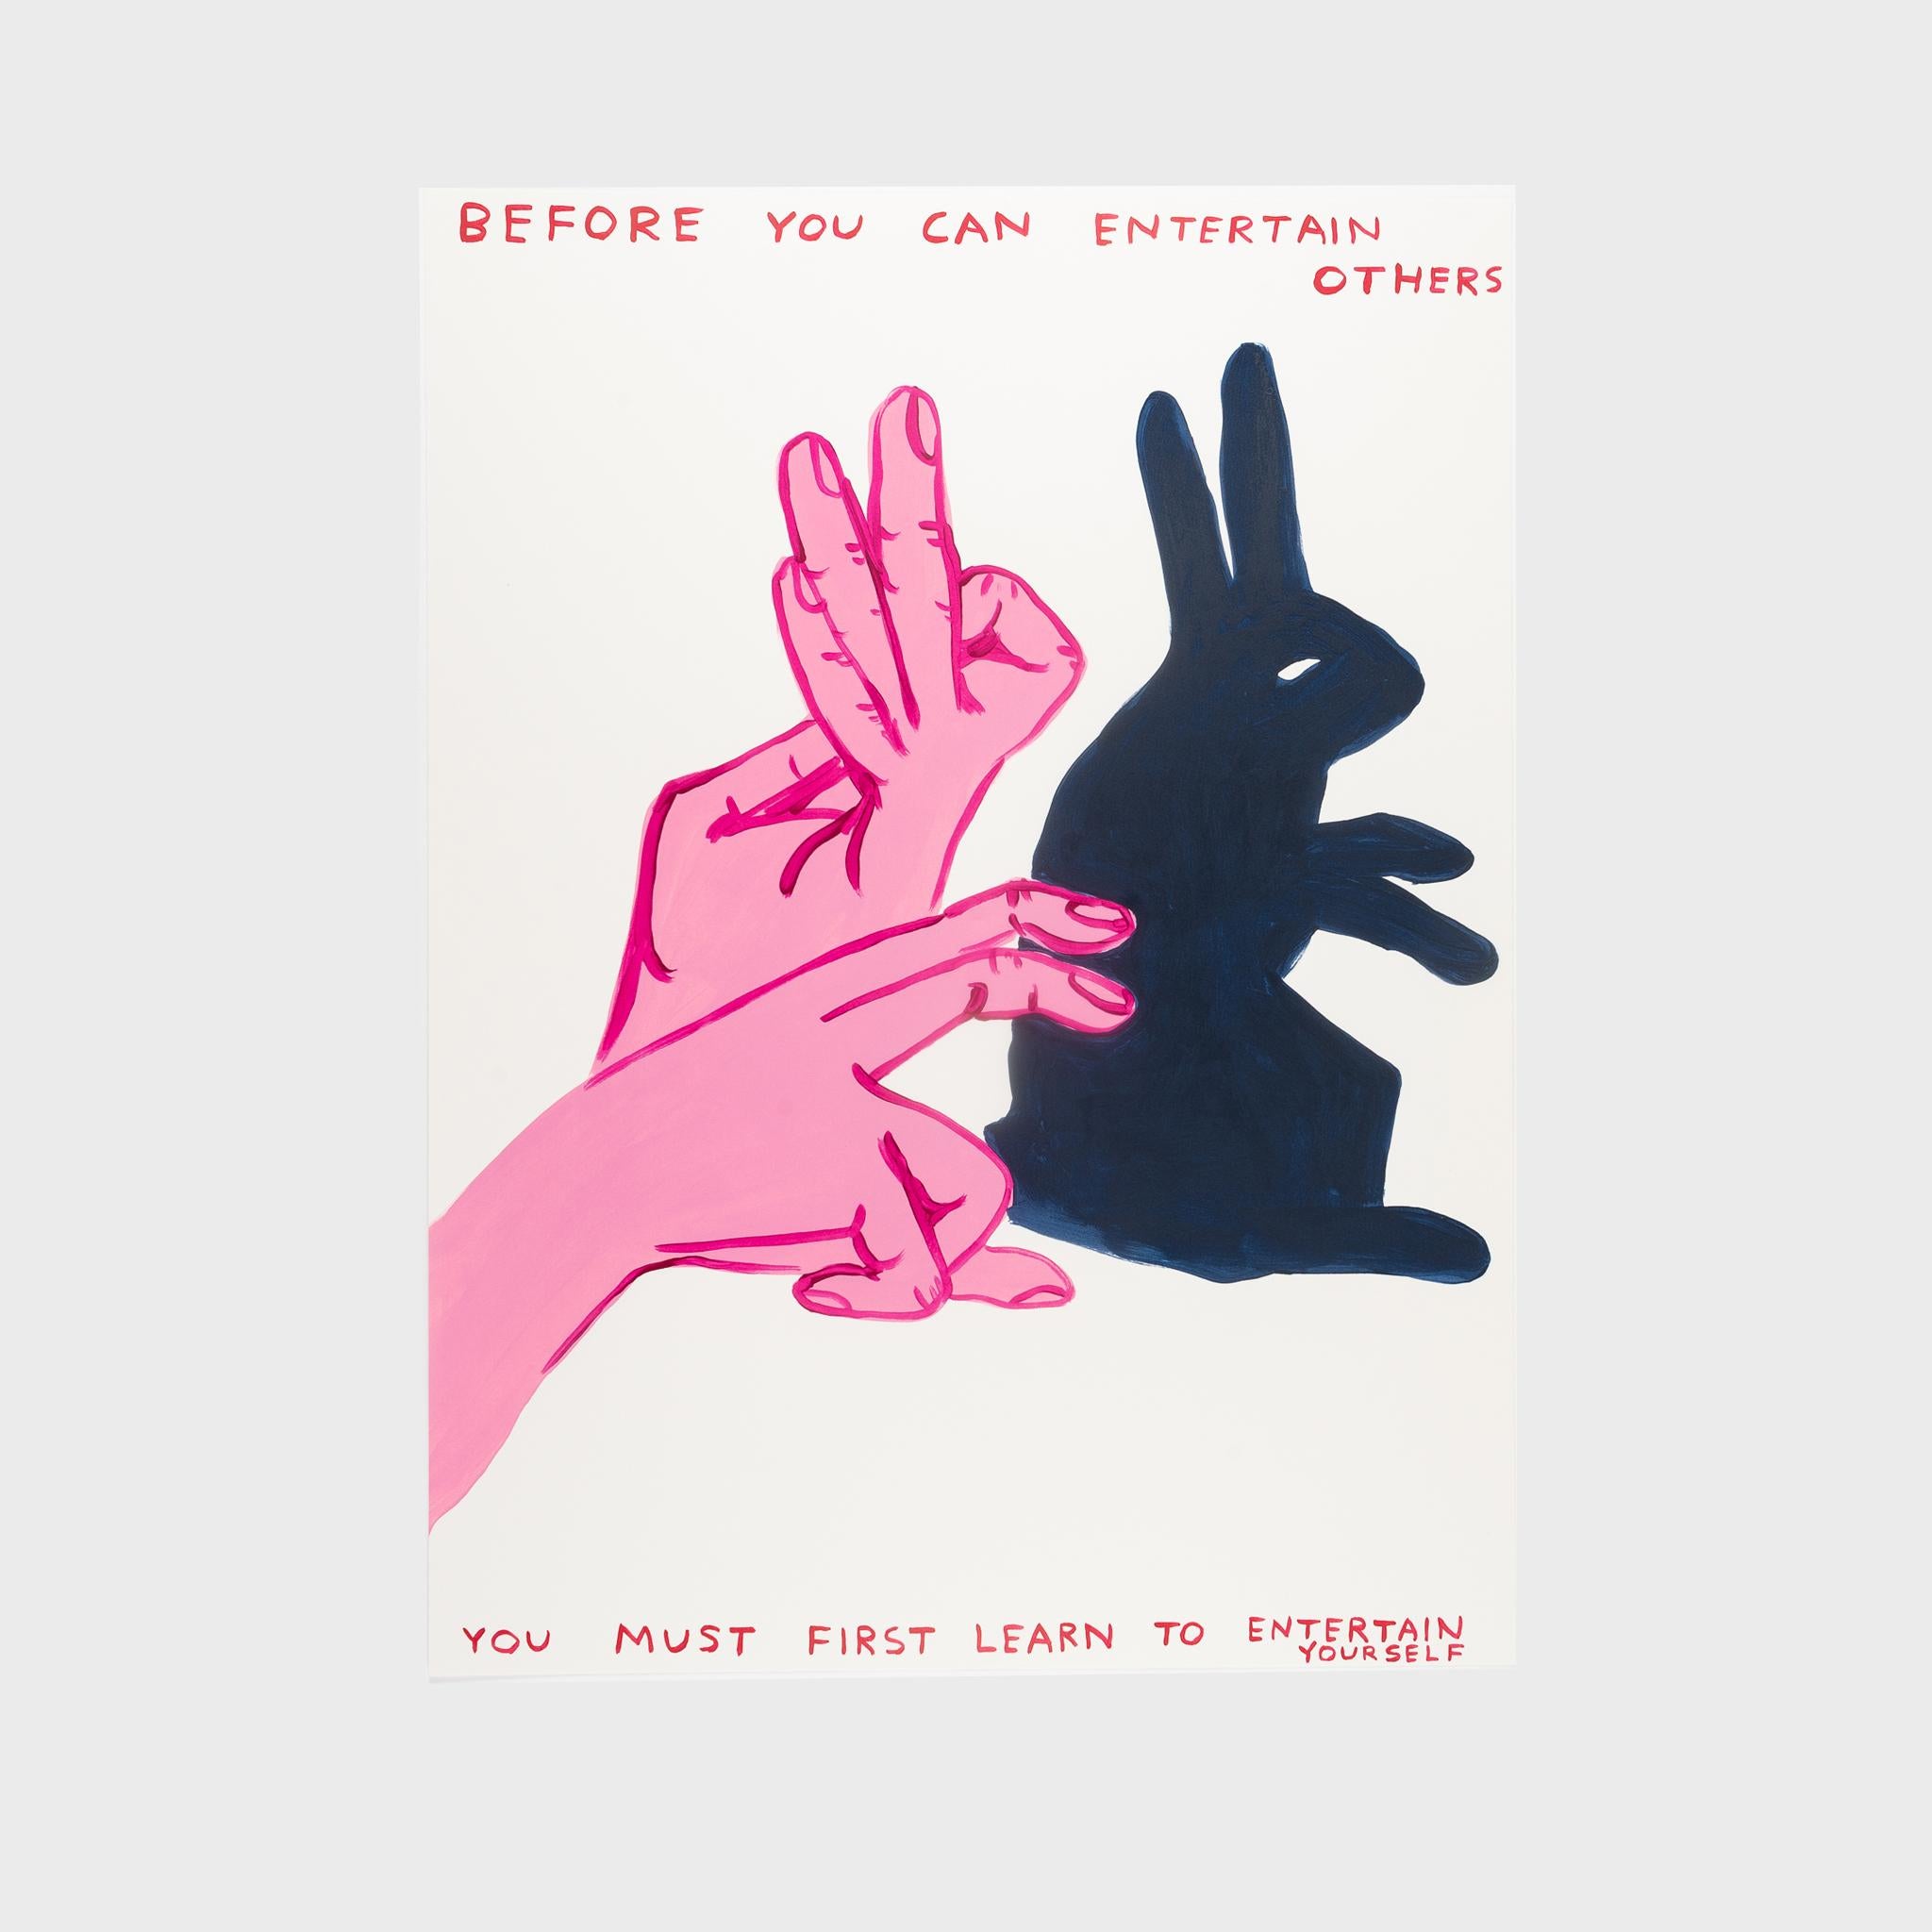 Before You Can Entertain - Print by David Shrigley